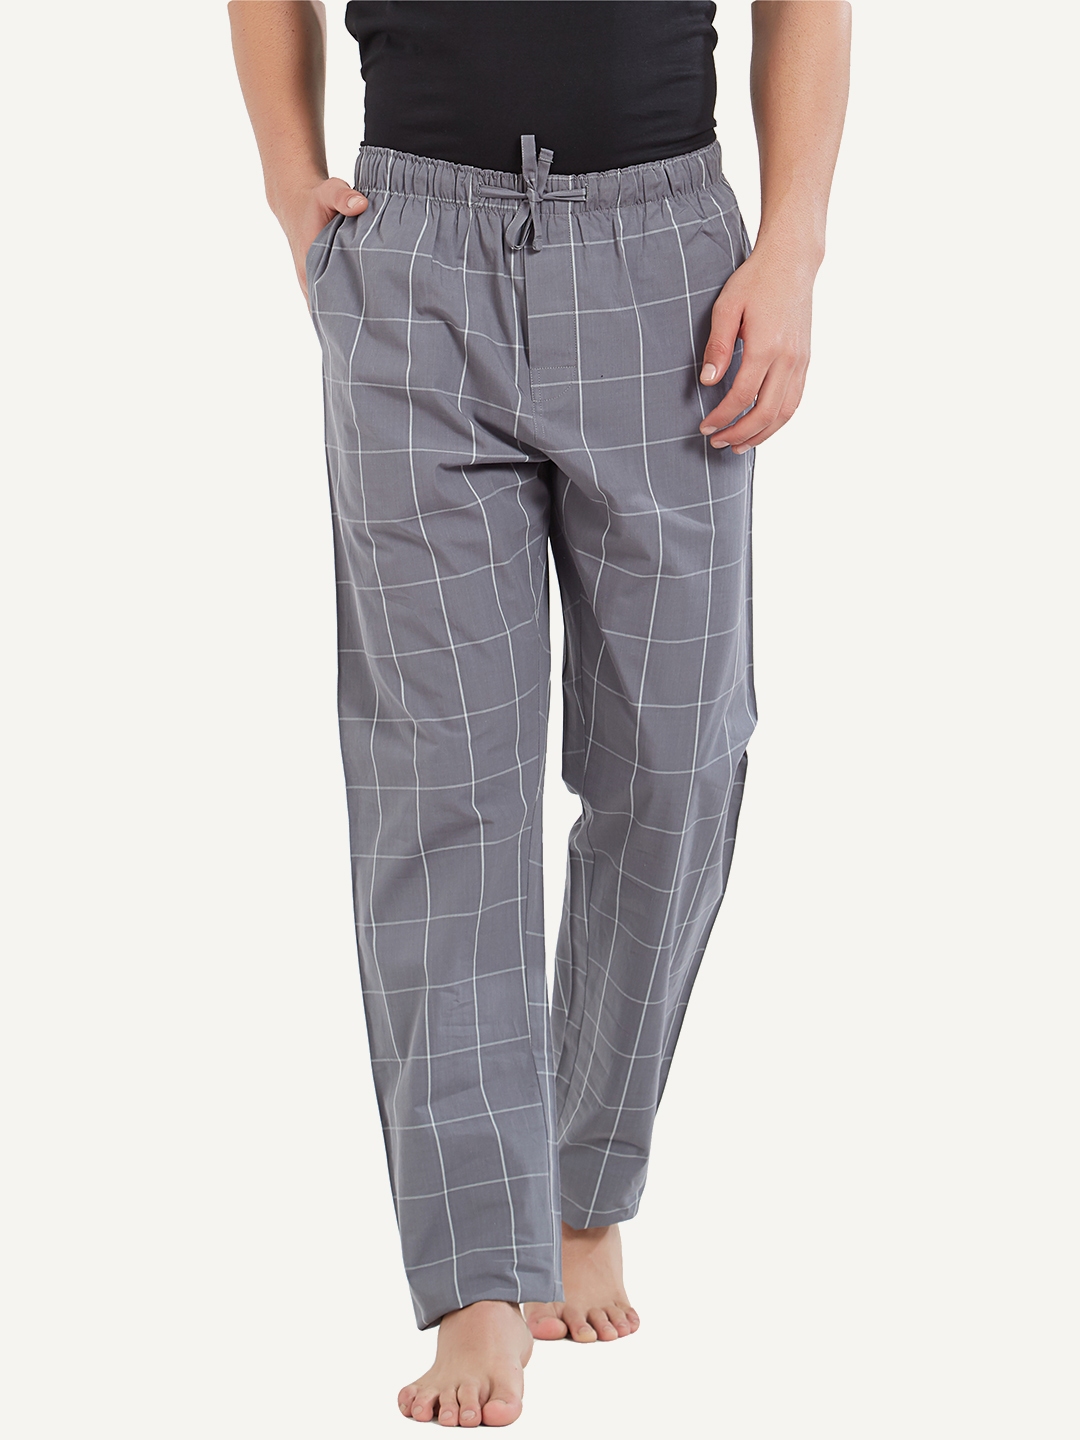 Home Trousers in Navy Blue | Shop now – CDLP